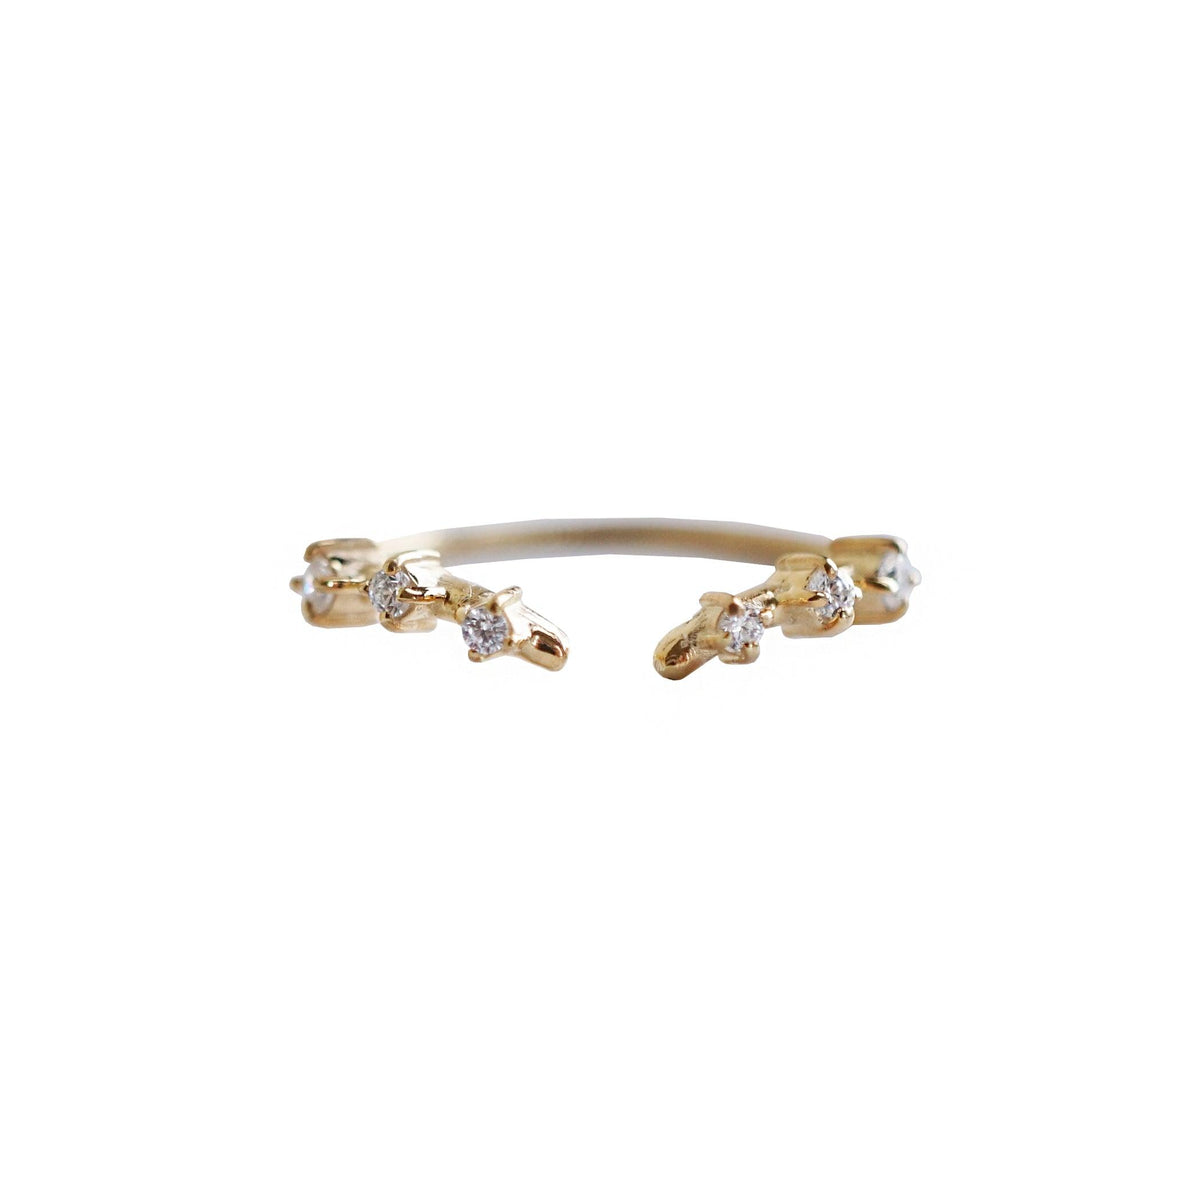 Rose Thorn Ring Band - Tippy Taste Jewelry